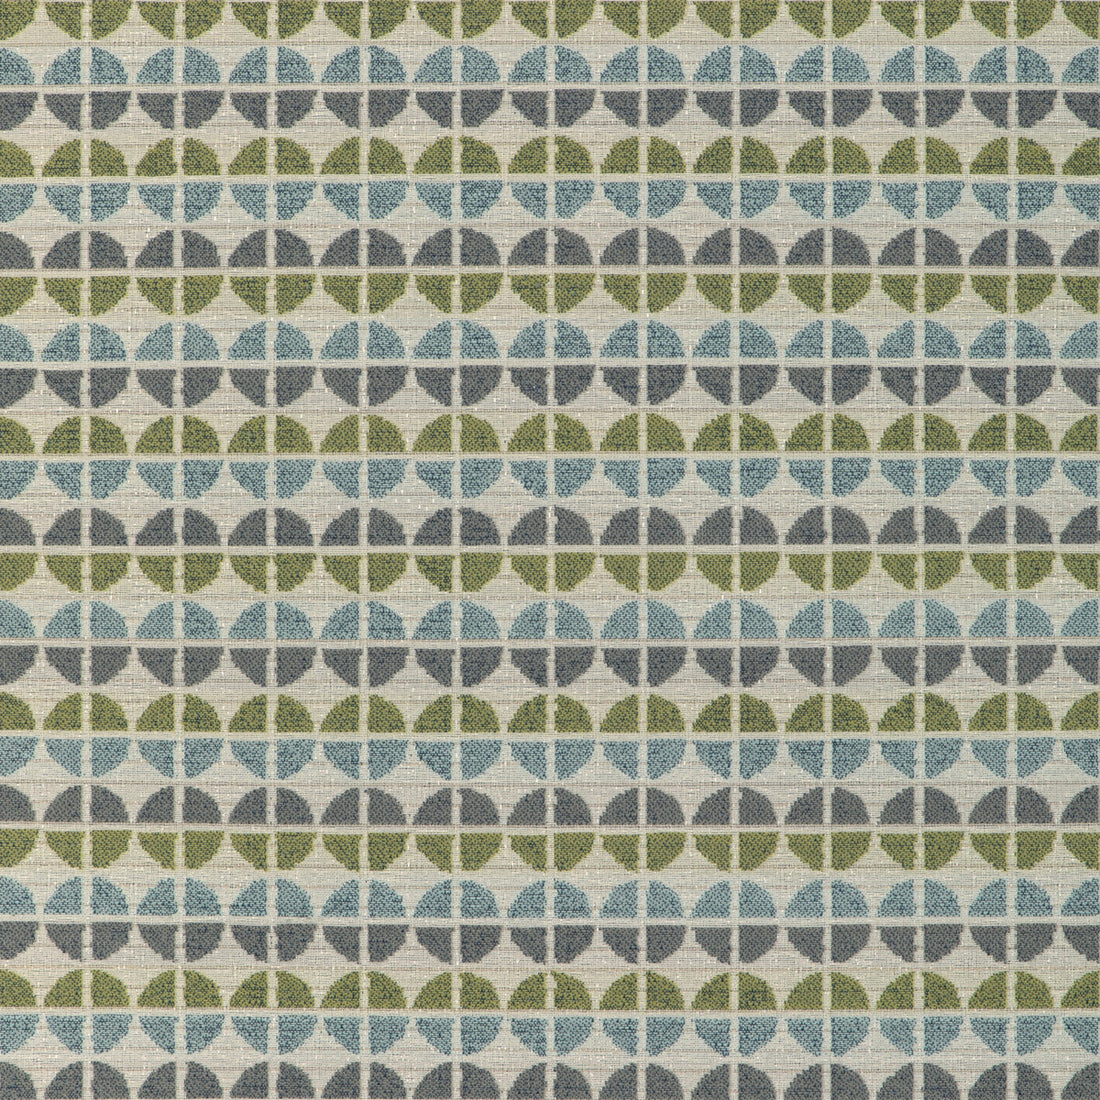 Decoy fabric in seaglass color - pattern 37051.315.0 - by Kravet Contract in the Chesapeake collection